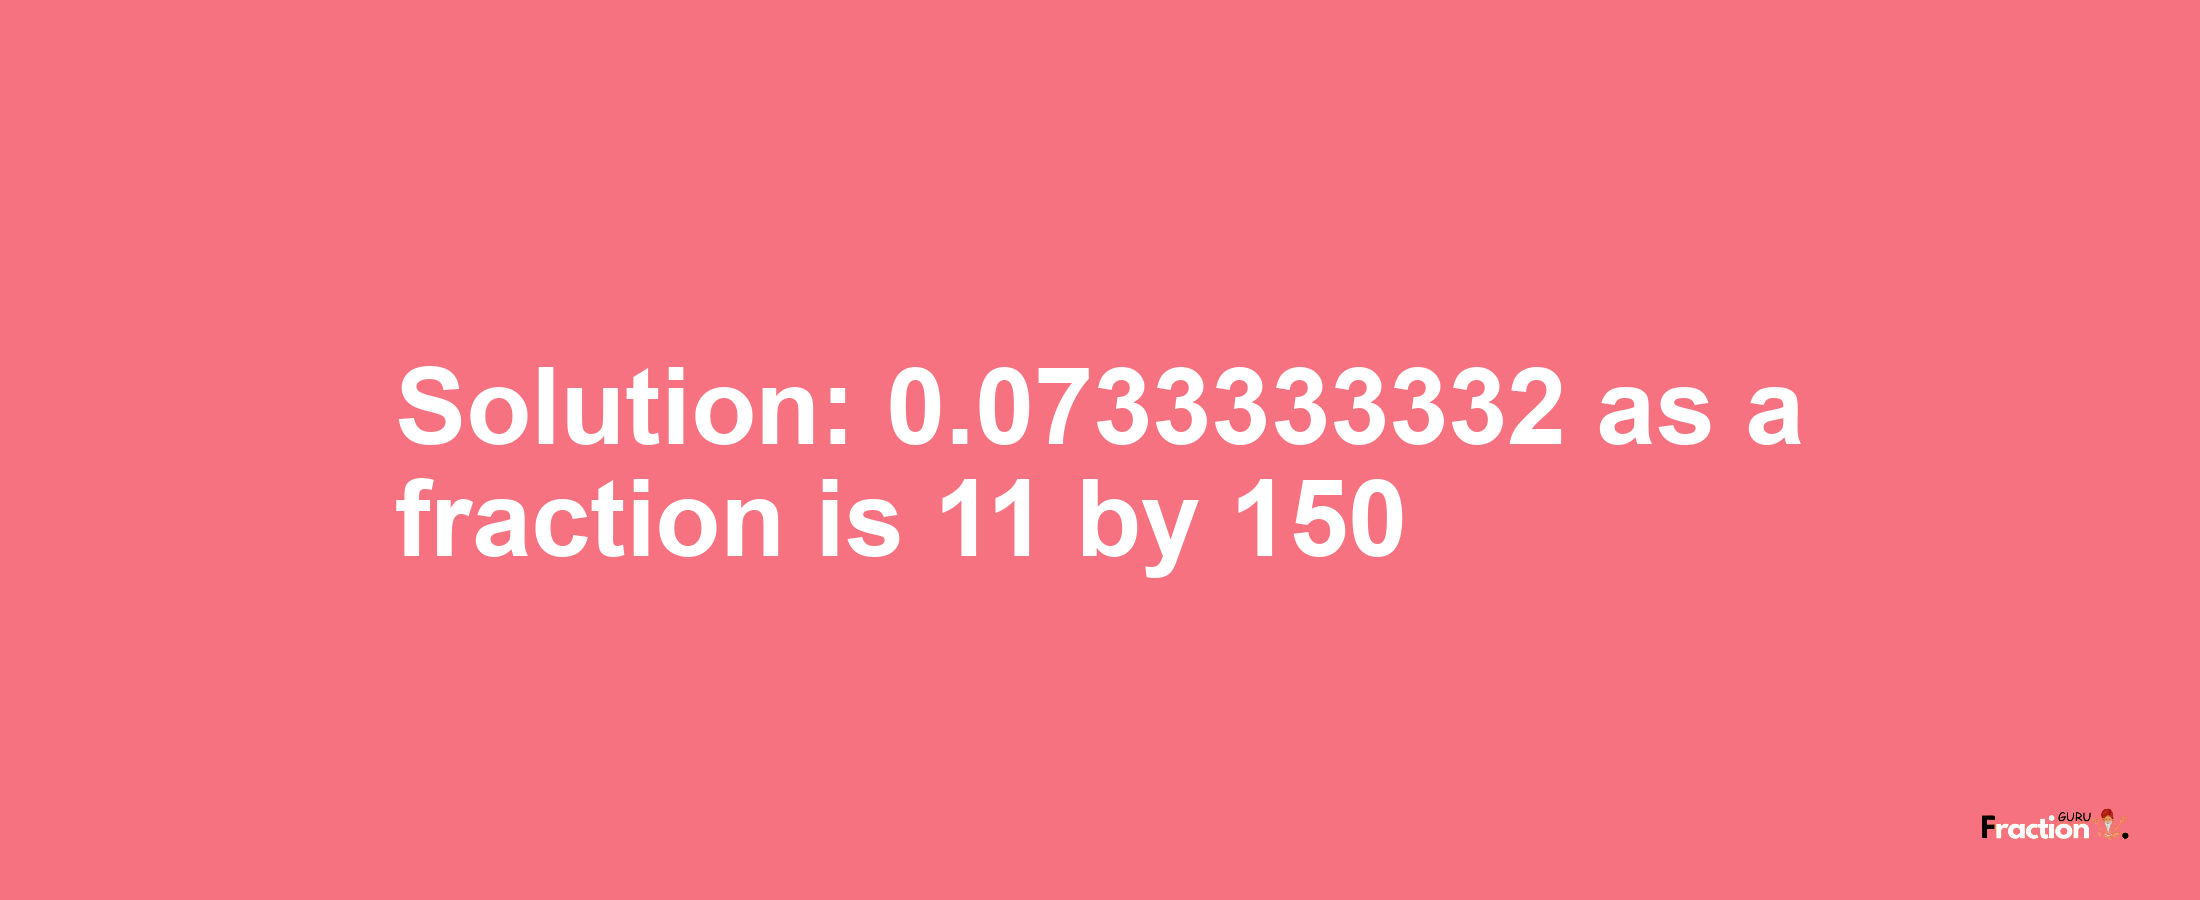 Solution:0.0733333332 as a fraction is 11/150